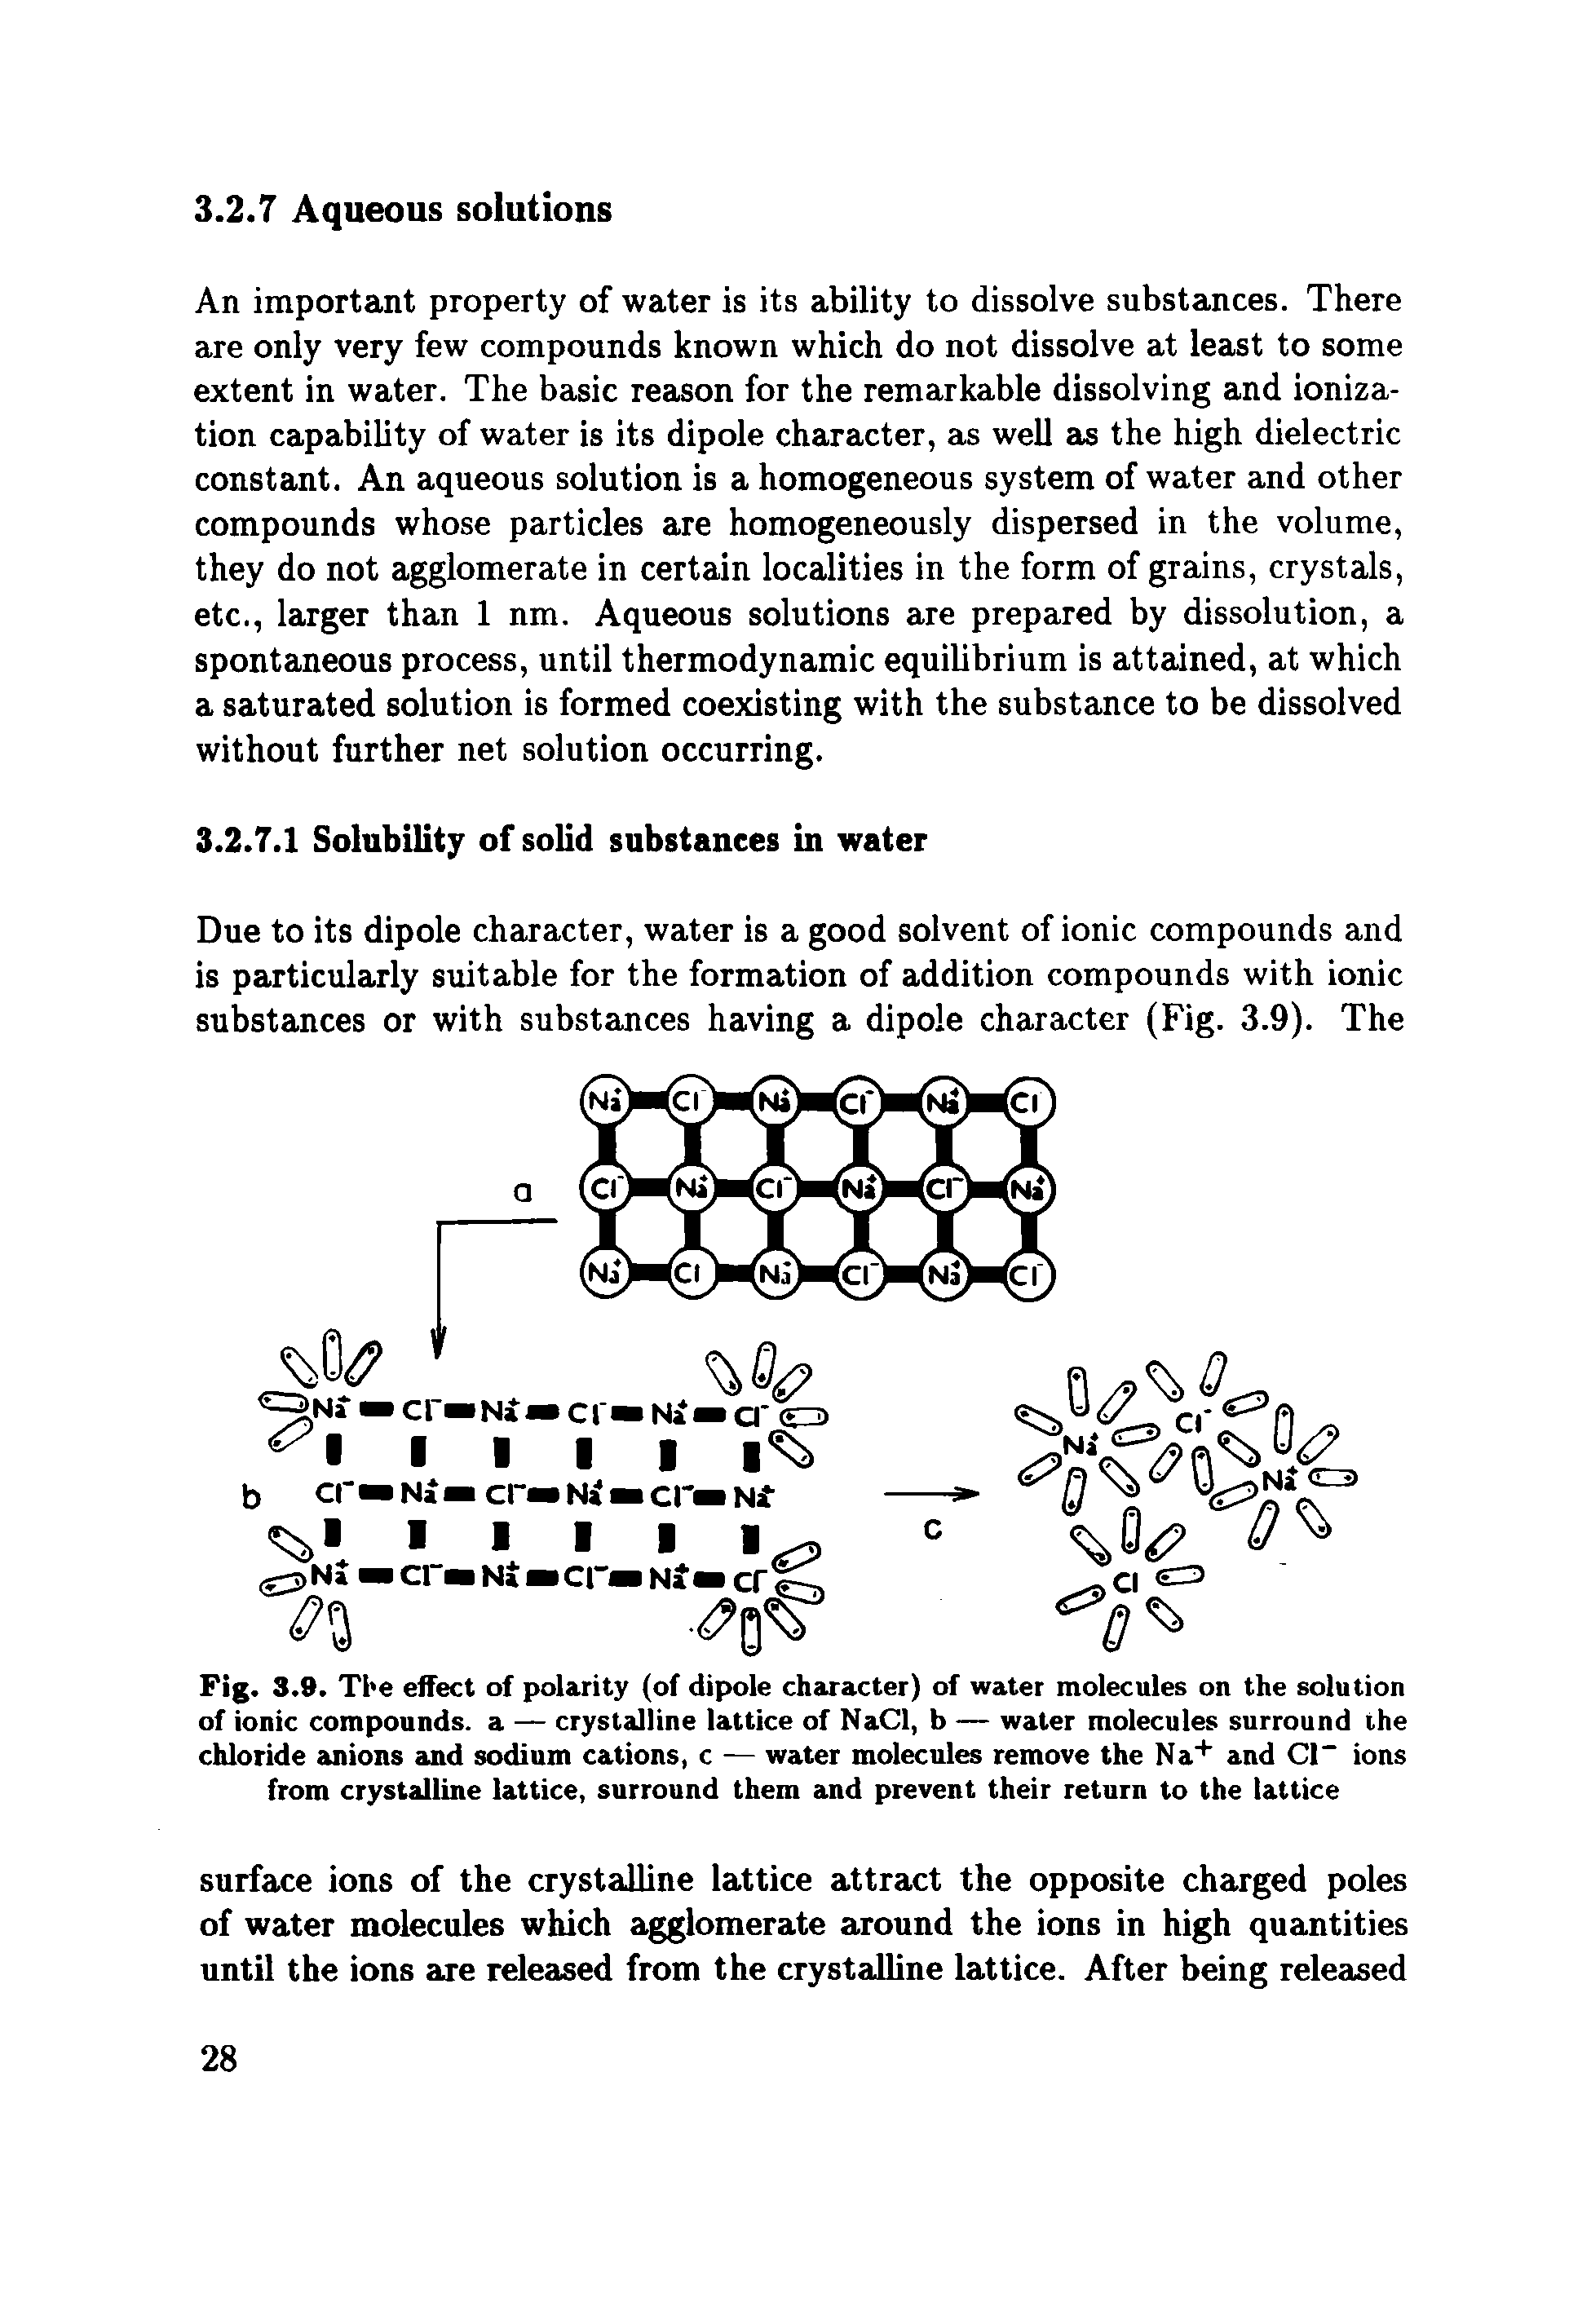 Fig. 3.9. Tbe effect of polarity (of dipole character) of water molecules on the solution of ionic compounds, a — crystalline lattice of NaCl, b — water molecules surround the chloride anions and sodium cations, c — water molecules remove the Na and Cl ions from crystalline lattice, surround them and prevent their return to the lattice...